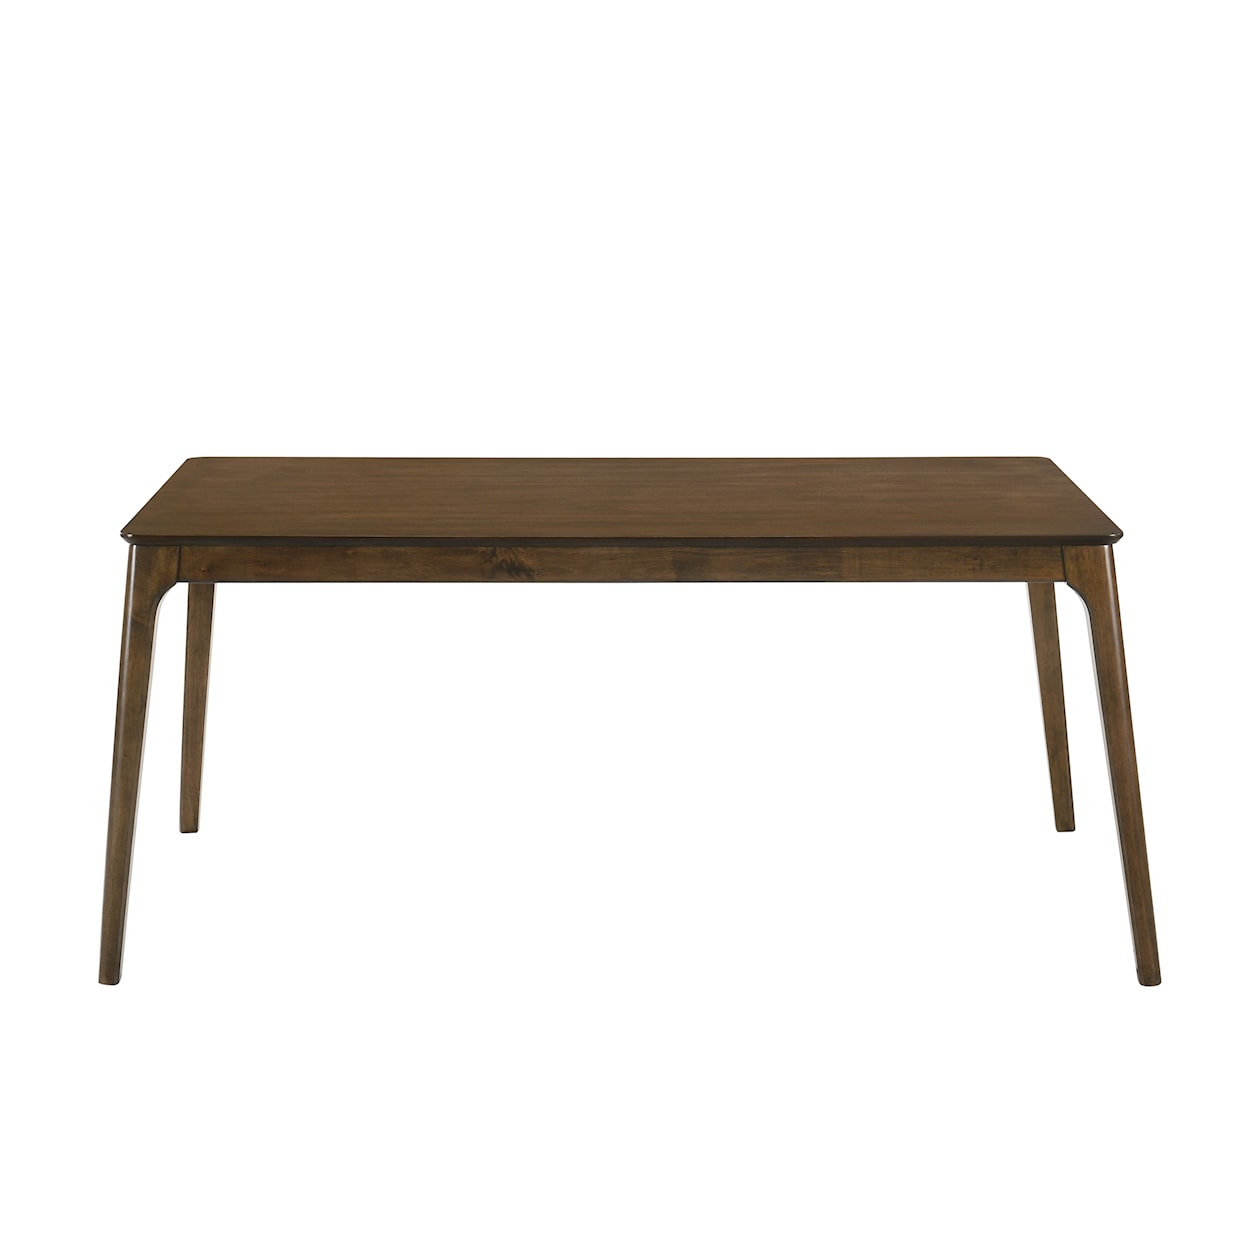 New Classic Furniture Maggie Dining Table